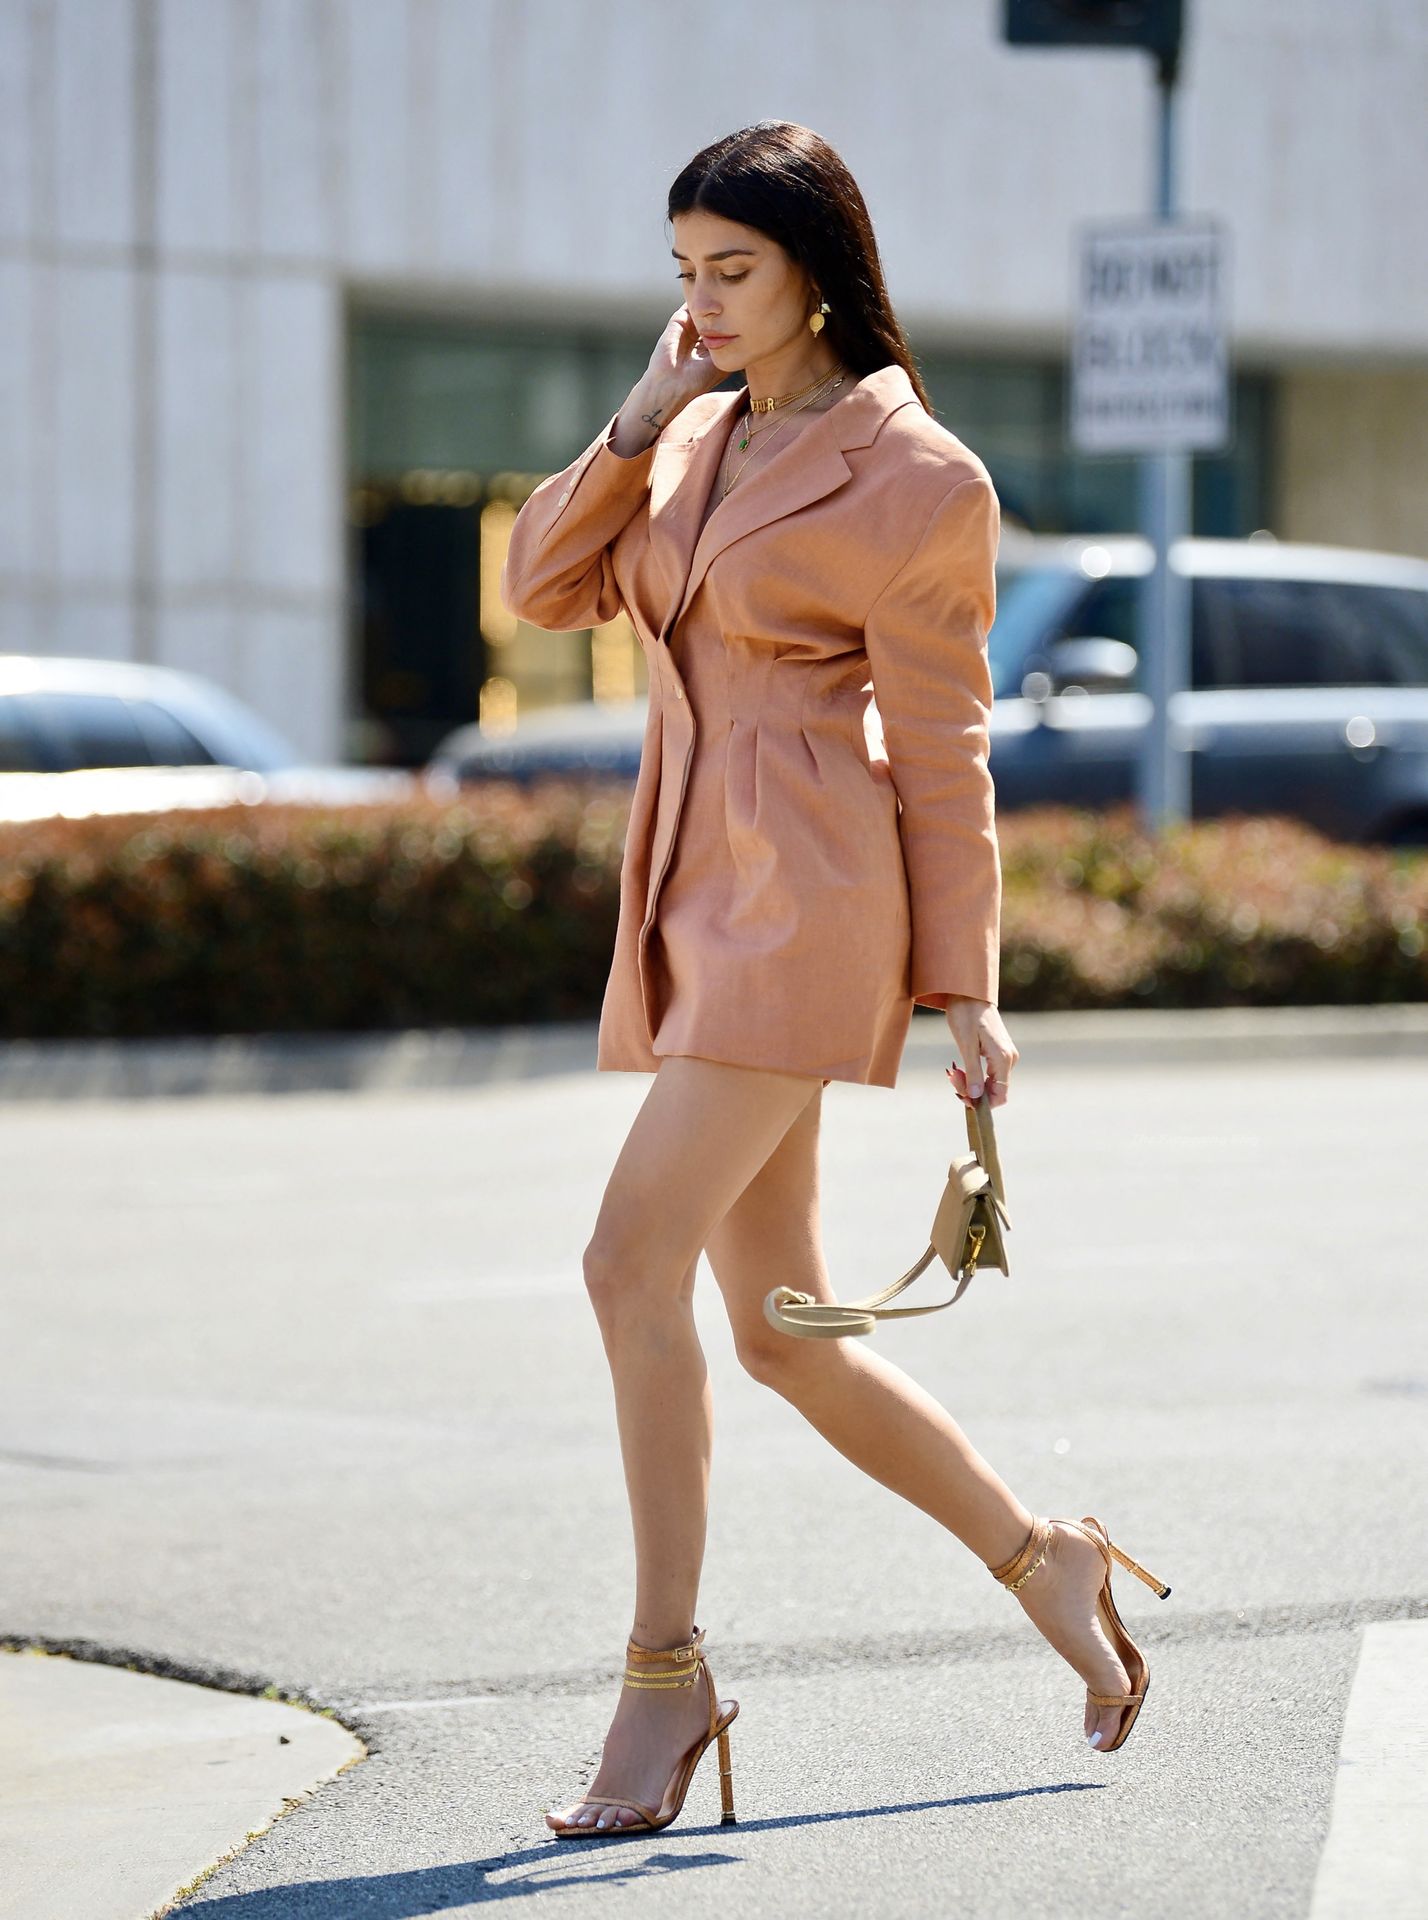 Nicole Williams Displays Her Incredibly Long Legs During A Street Style Shoot (12 Photos)